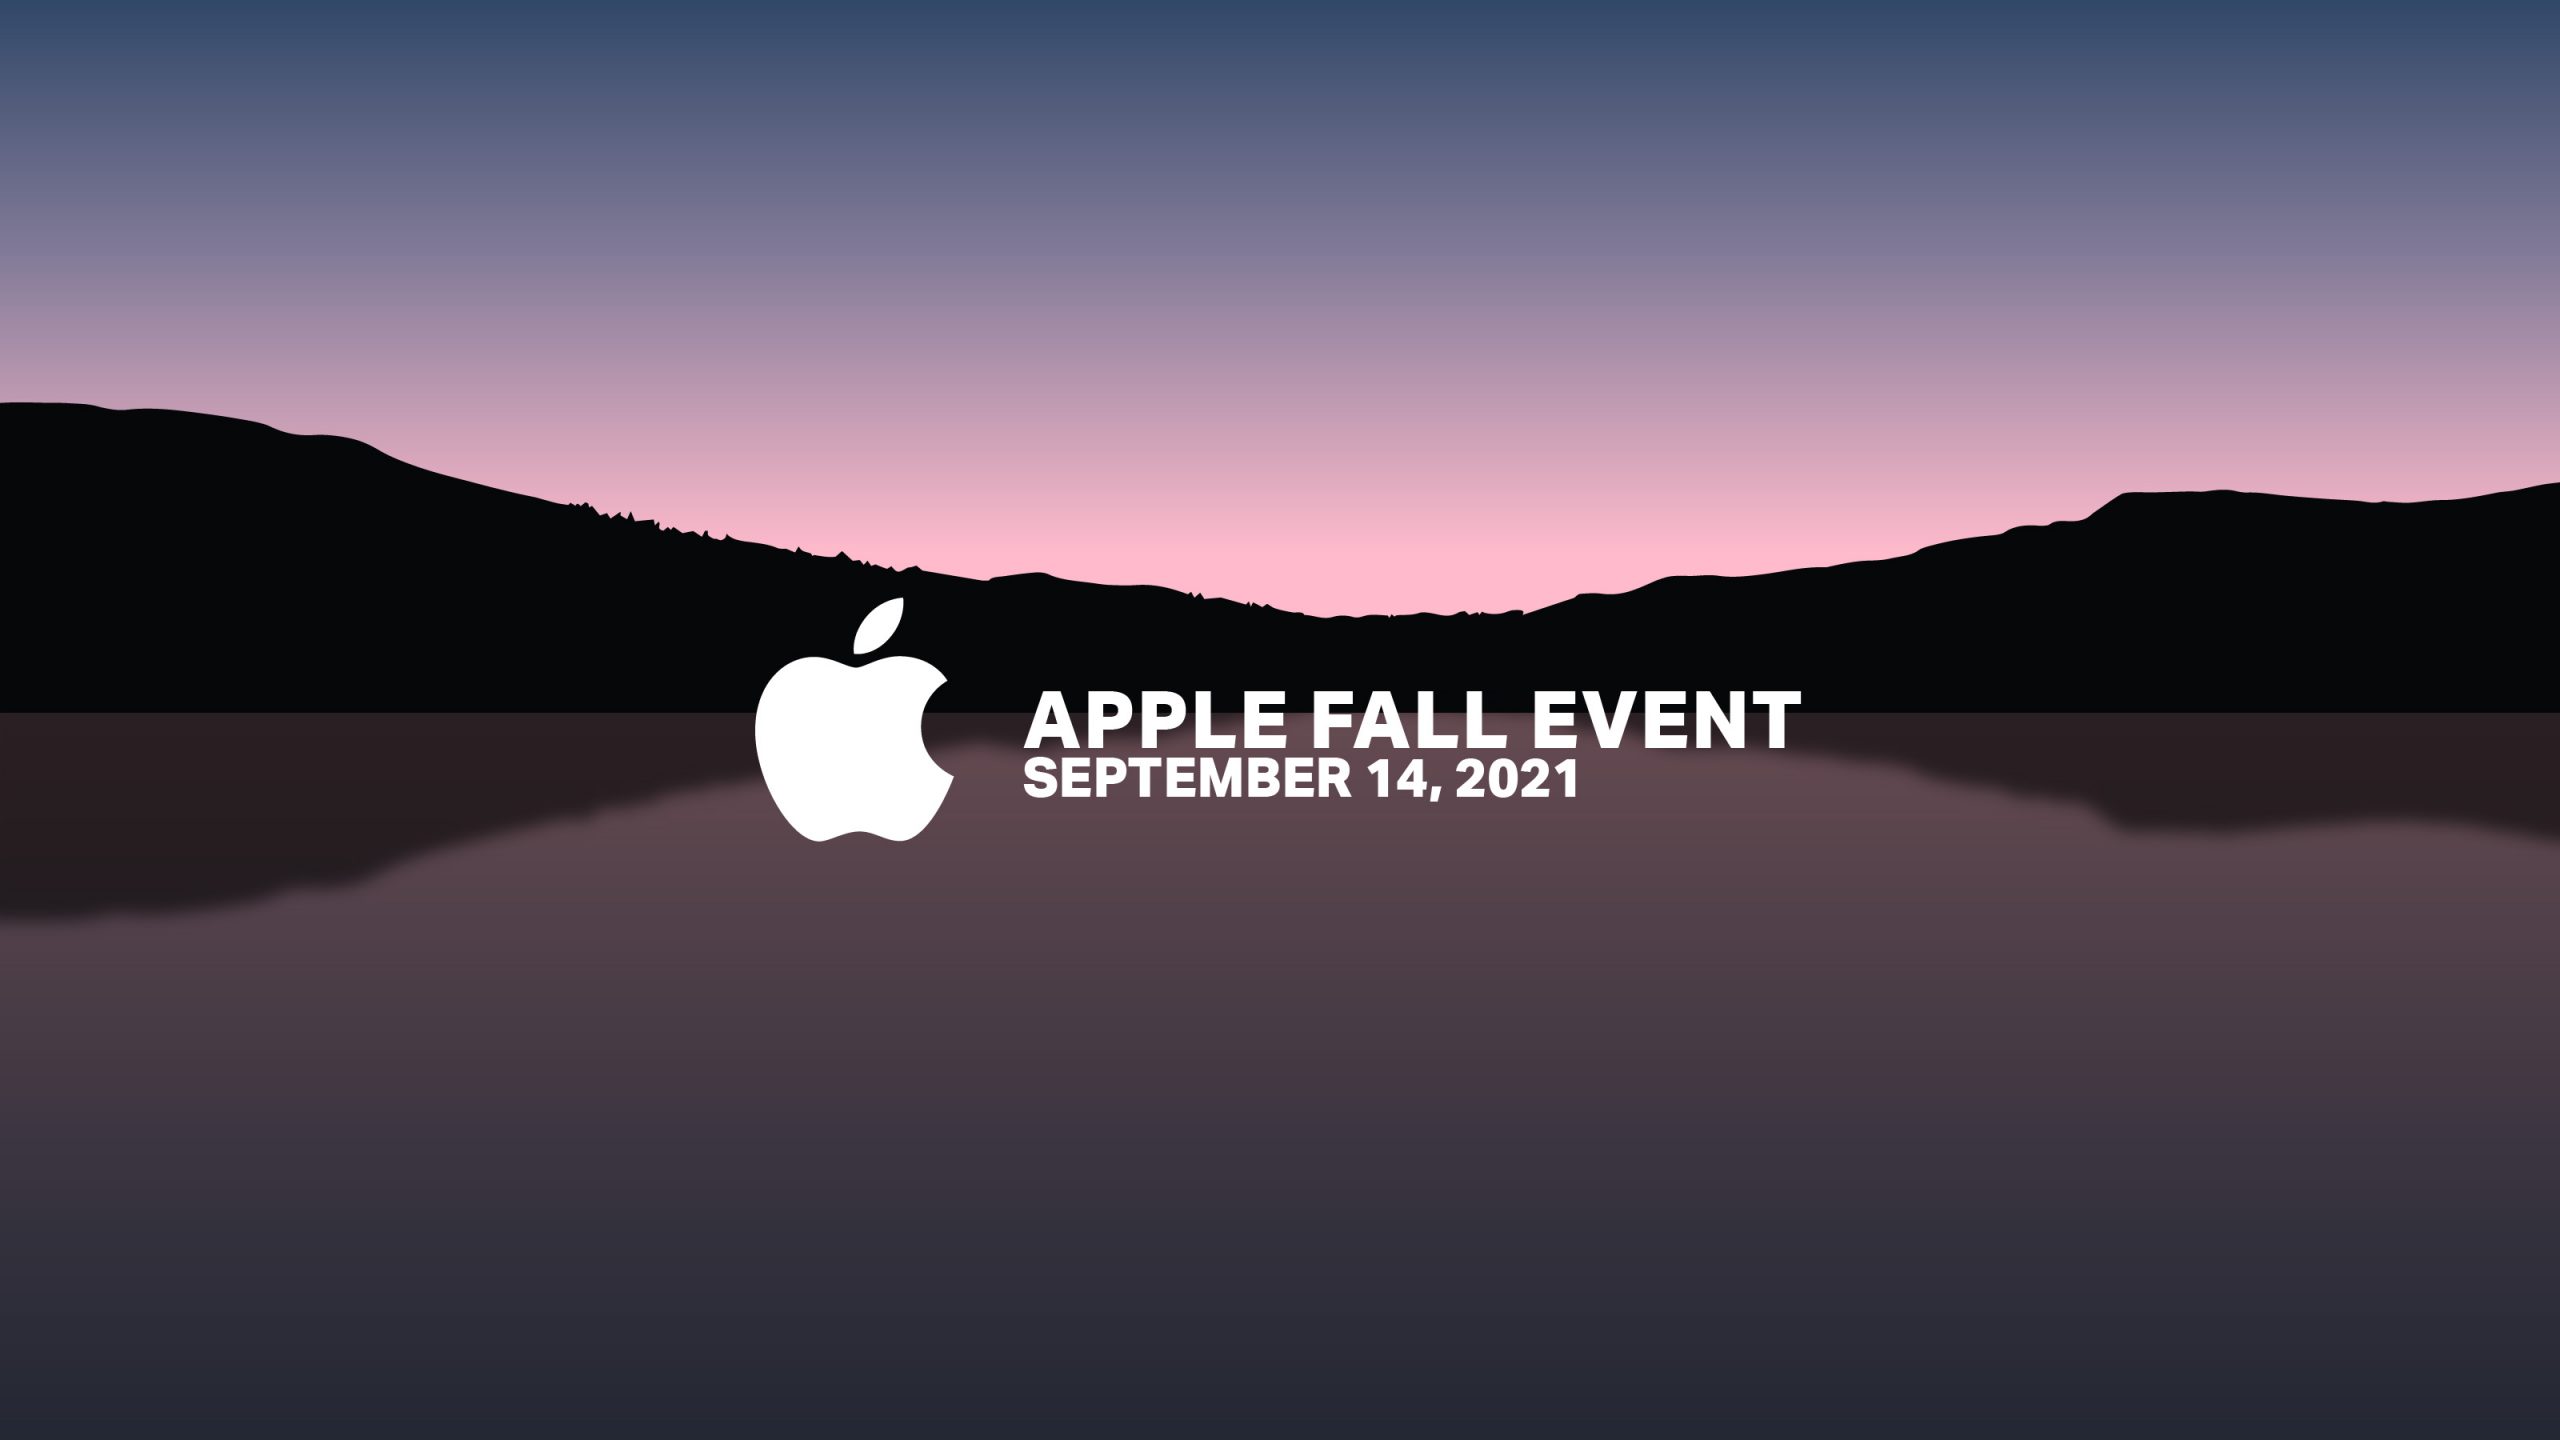 Apple Event September 2021 What Are The New Models Released, Prices